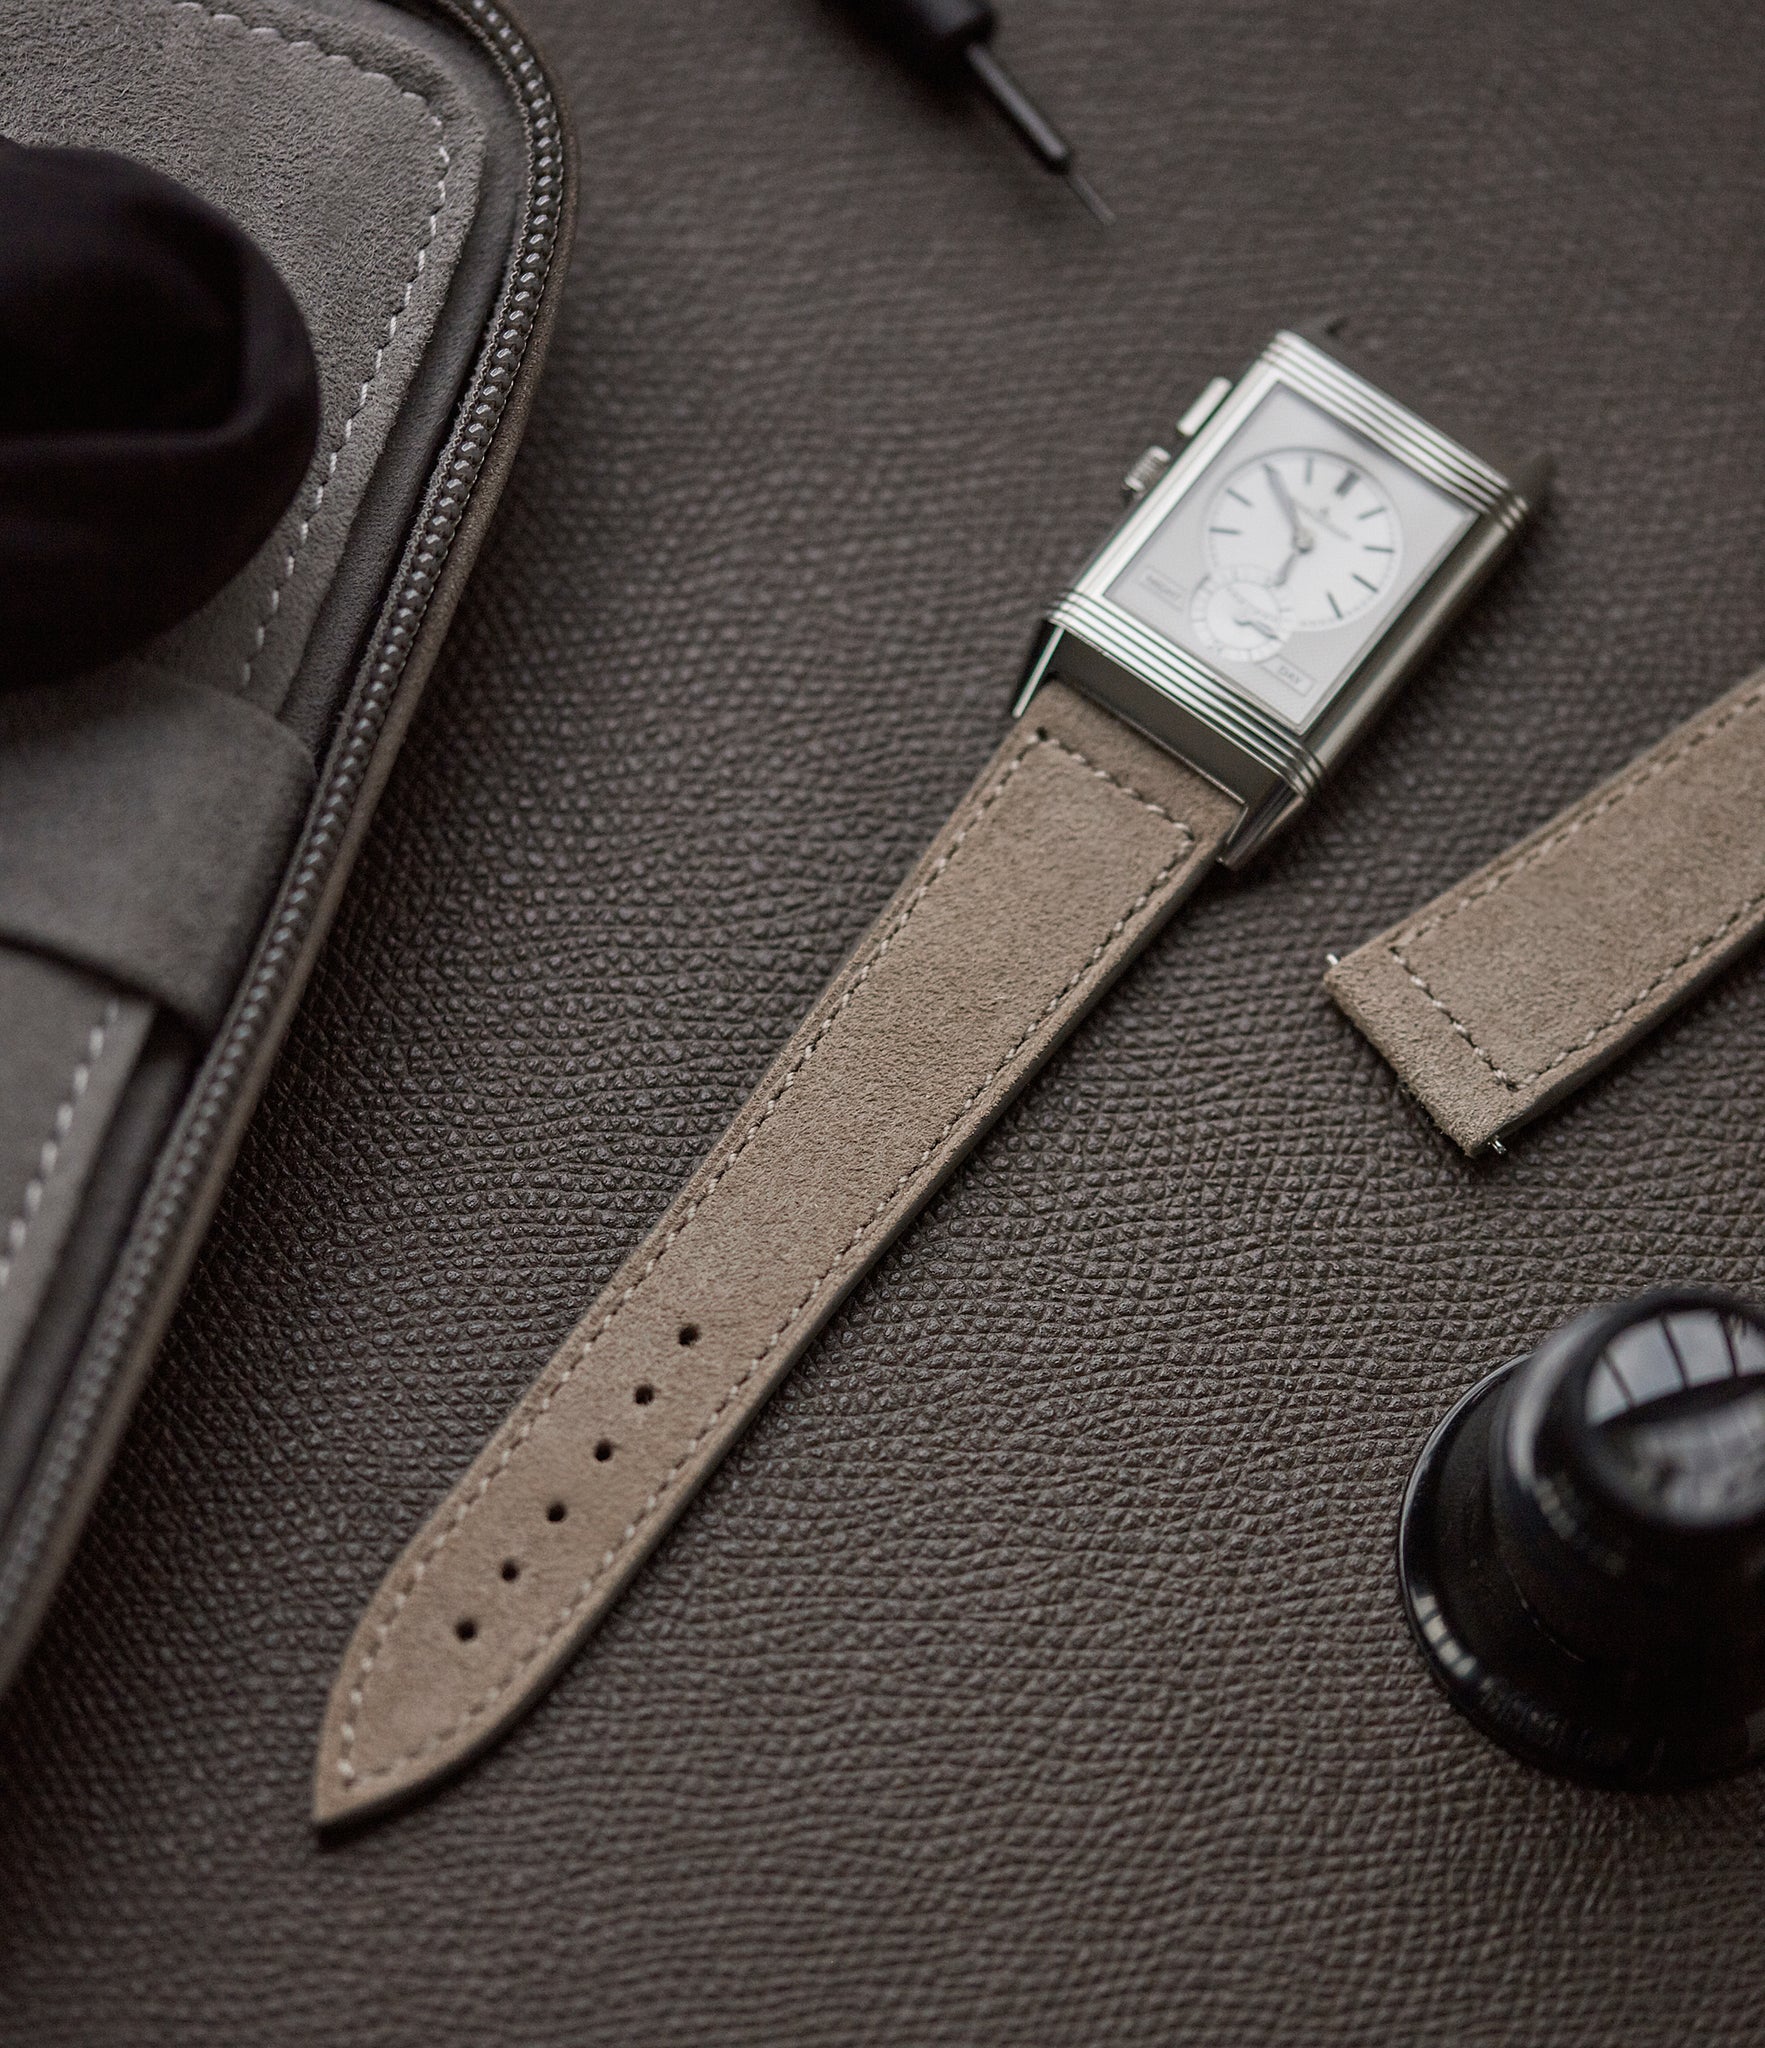 Selling Copenhagen Molequin watch strap light taupe suede leather box stitched quick-release springbars buckle handcrafted European-made for sale online at A Collected Man London